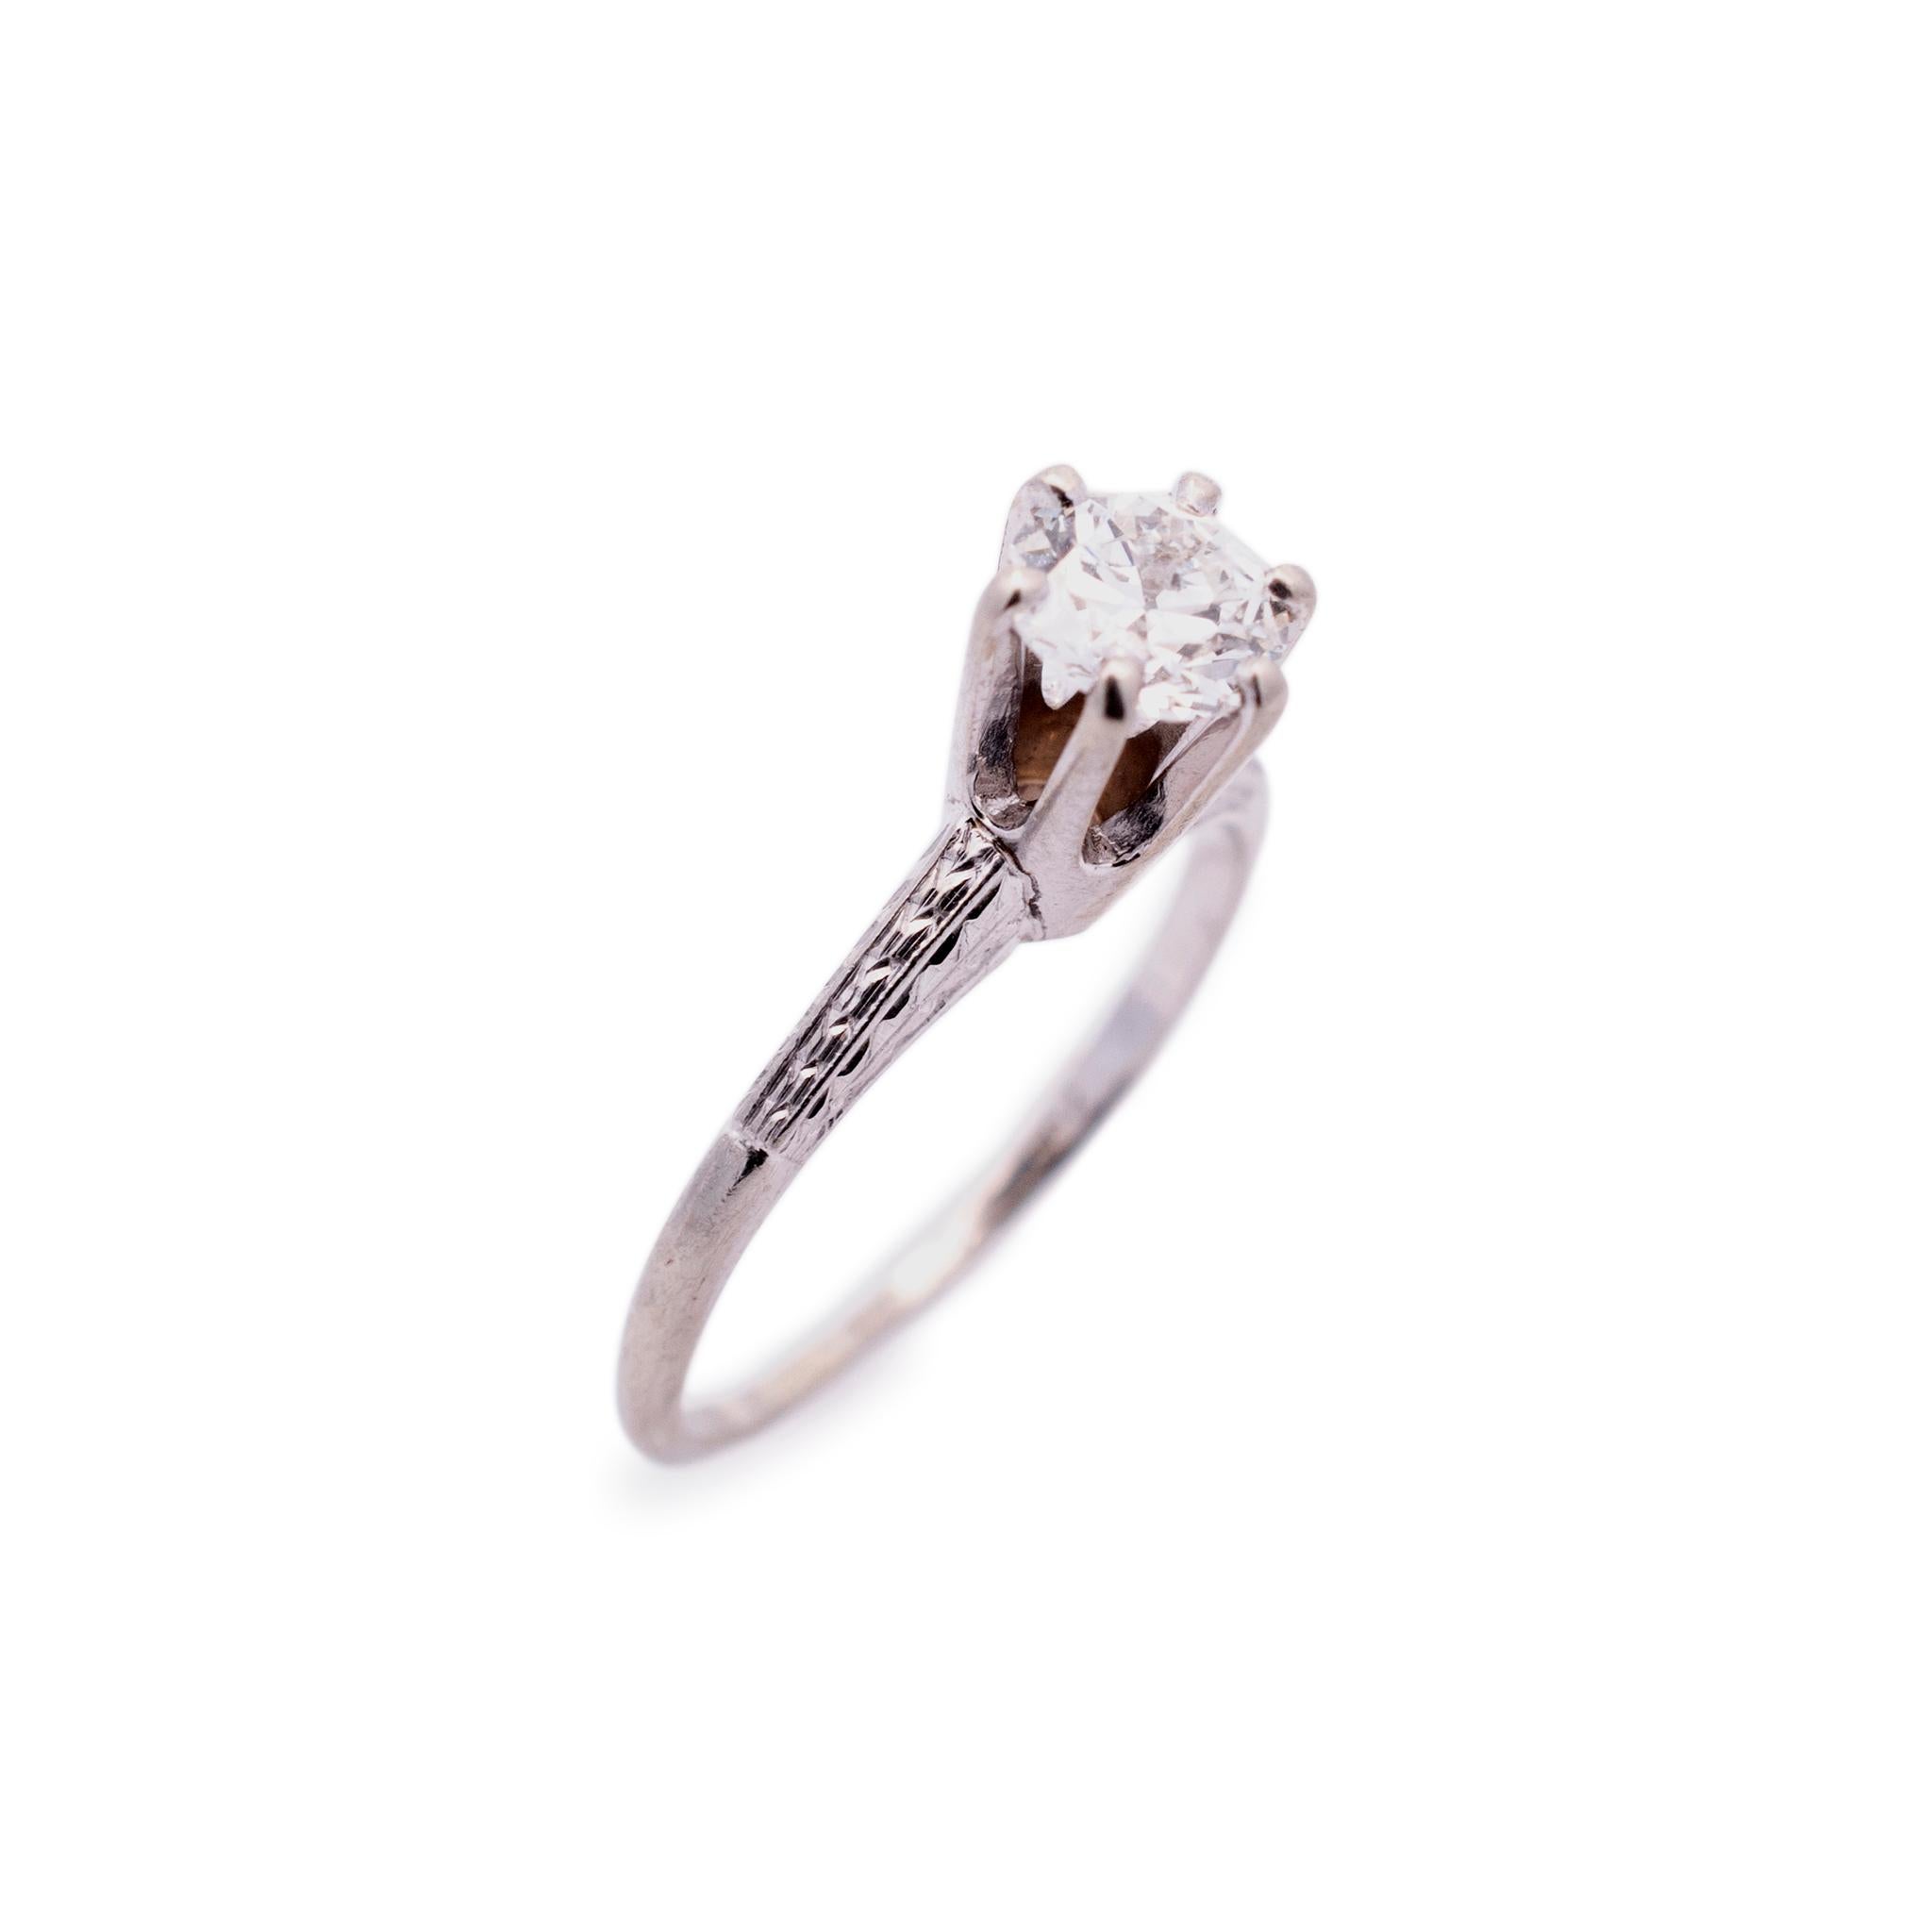 Gender: Ladies

Metal Type: 18K White Gold

Ring Size: 5.5

Total weight: 2.30 grams

Ladies 18K white gold diamond solitaire engagement vintage ring with a half round shank. Engraved with 